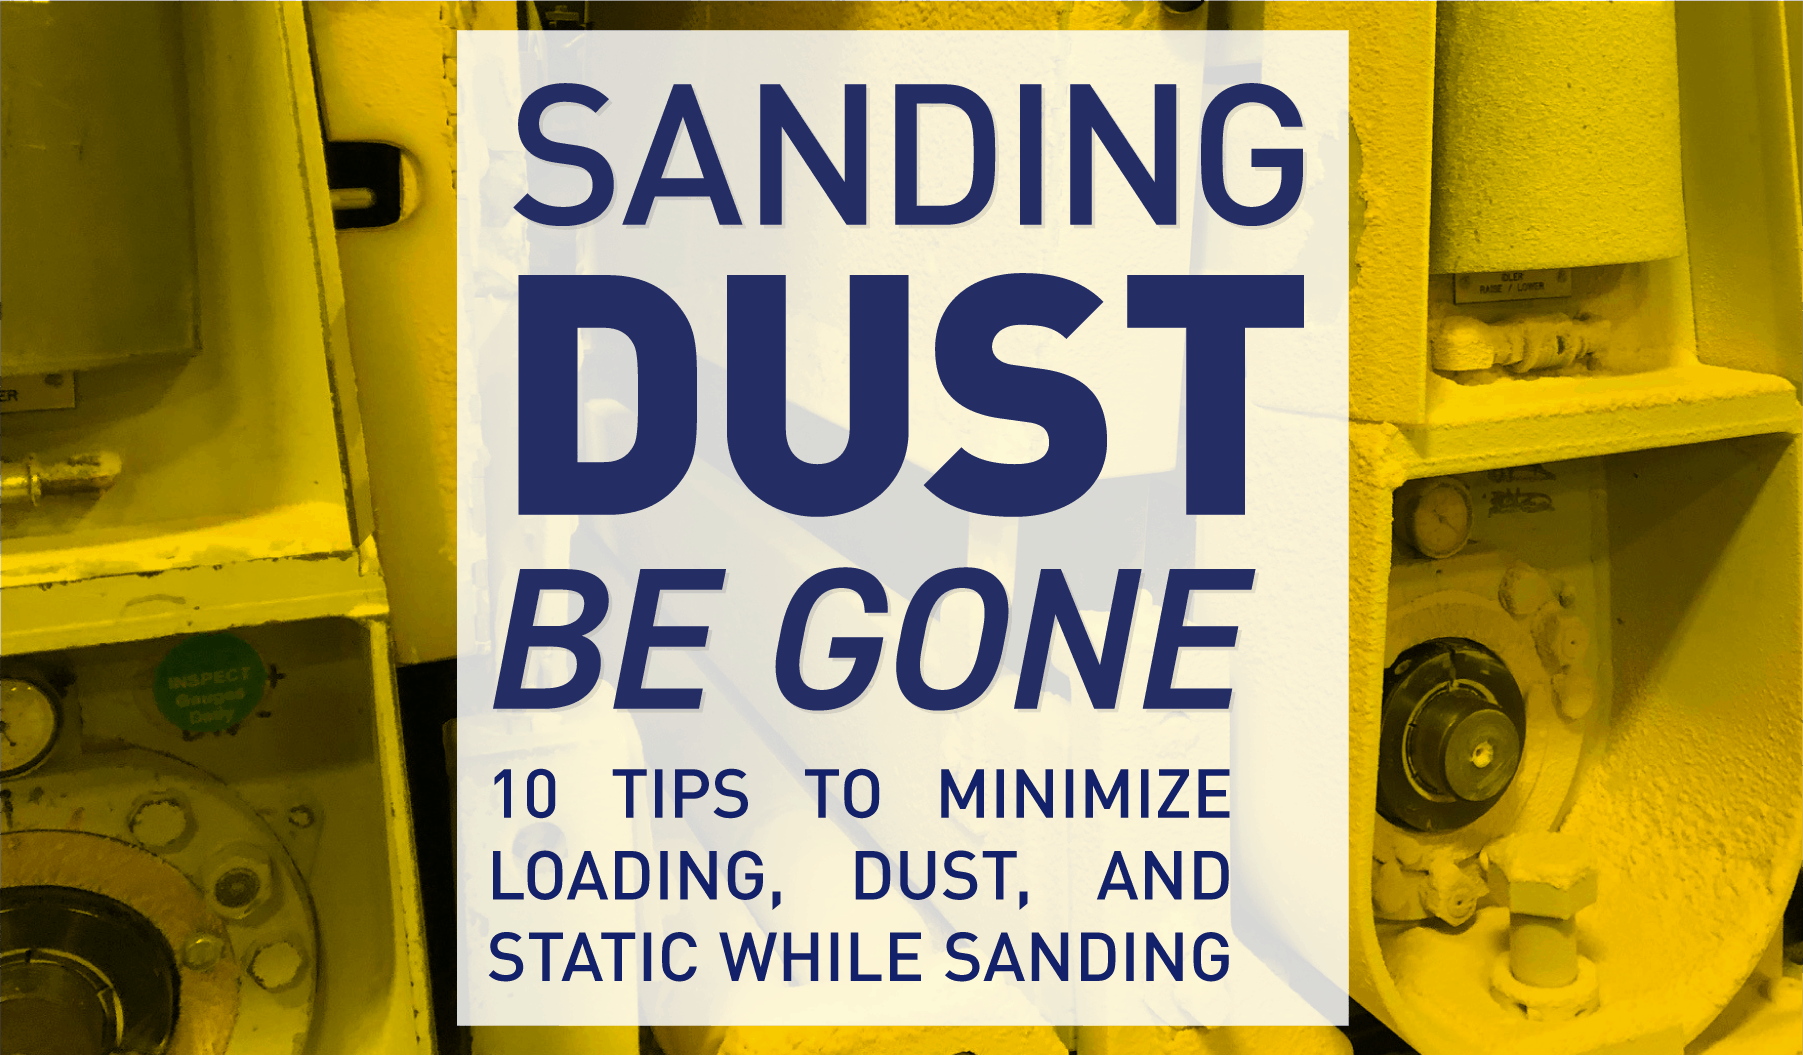 Wet Sanding/How to Sand without Dust 